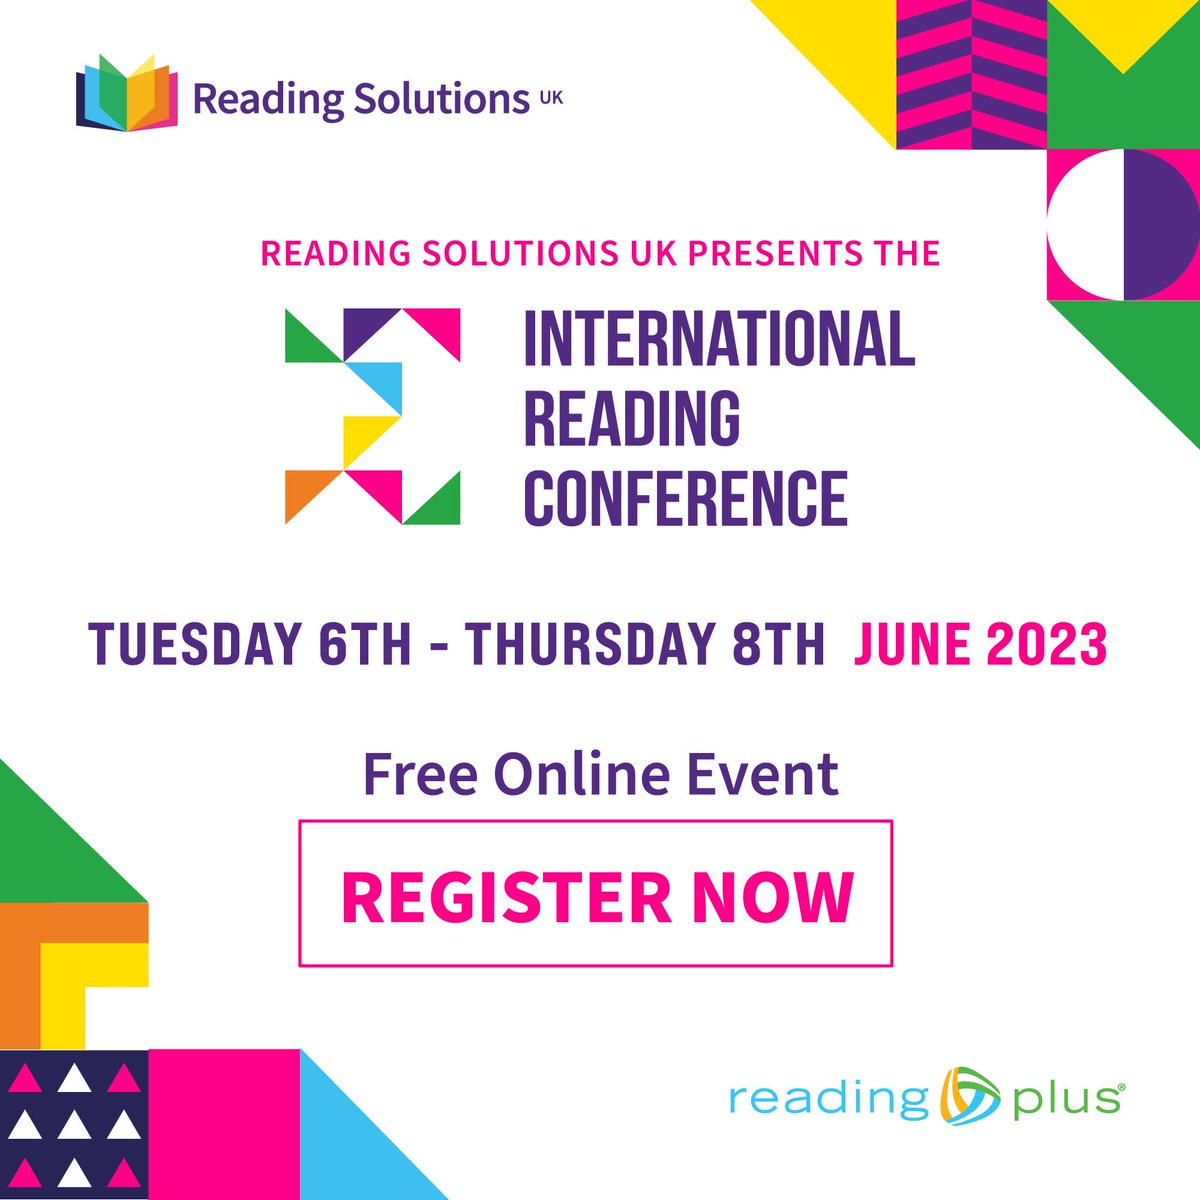 Wondering what #digitalstrategies can be implemented to ensure success and how to help students to continue accelerating their #reading growth and feel motivated and empowered to #read?

Discover innovative approaches for unlocking your students' full potential. Join the annual